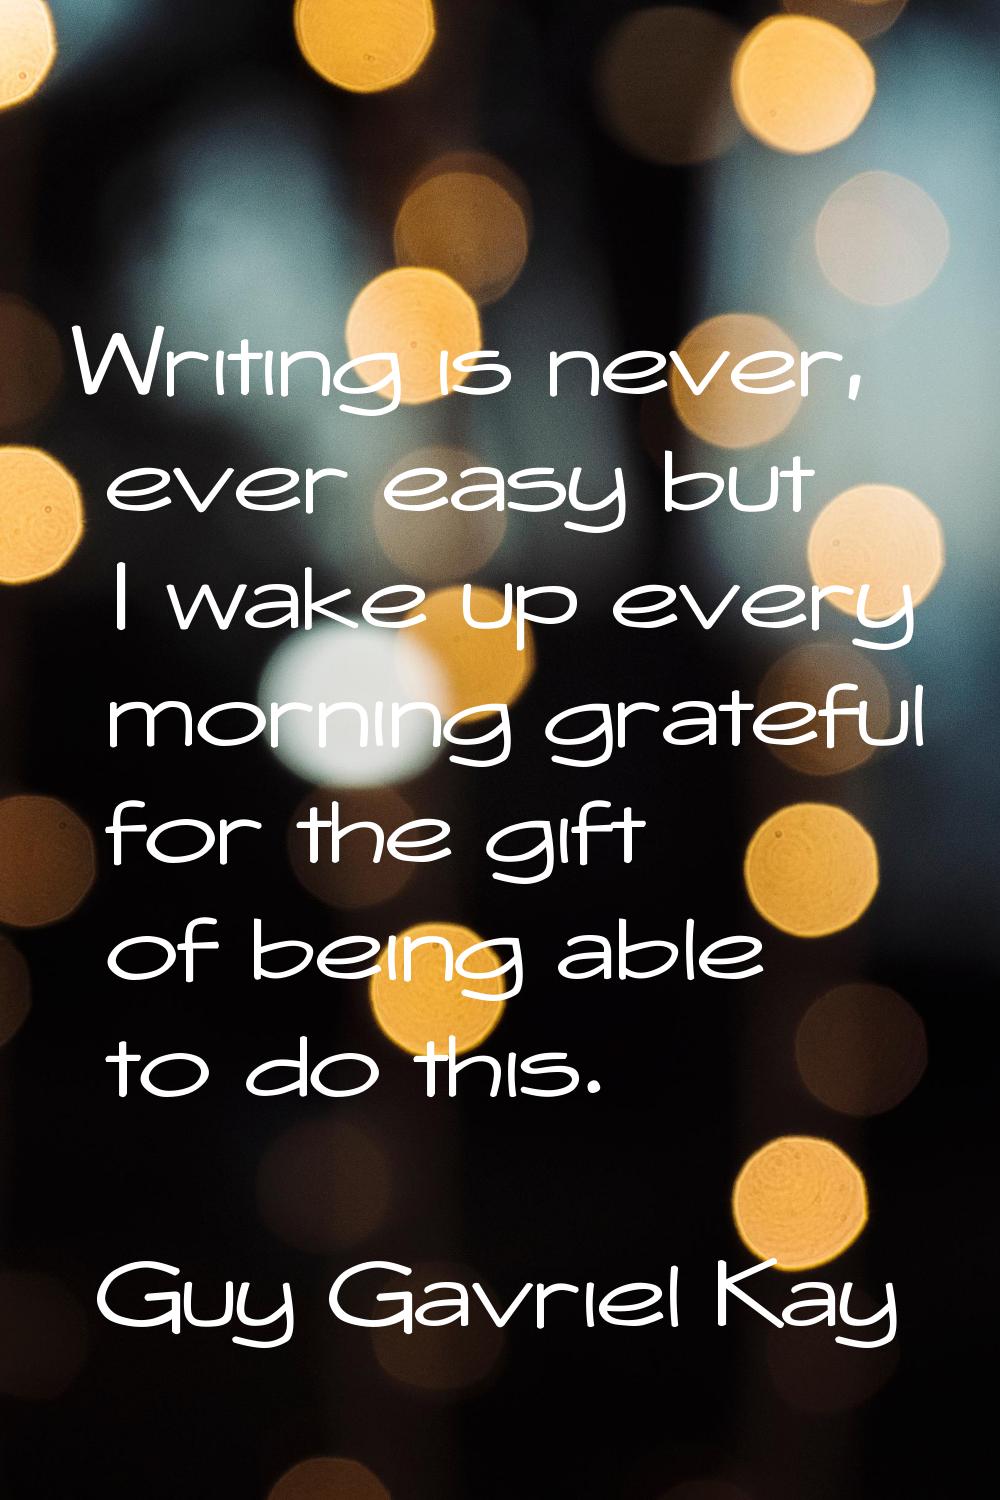 Writing is never, ever easy but I wake up every morning grateful for the gift of being able to do t